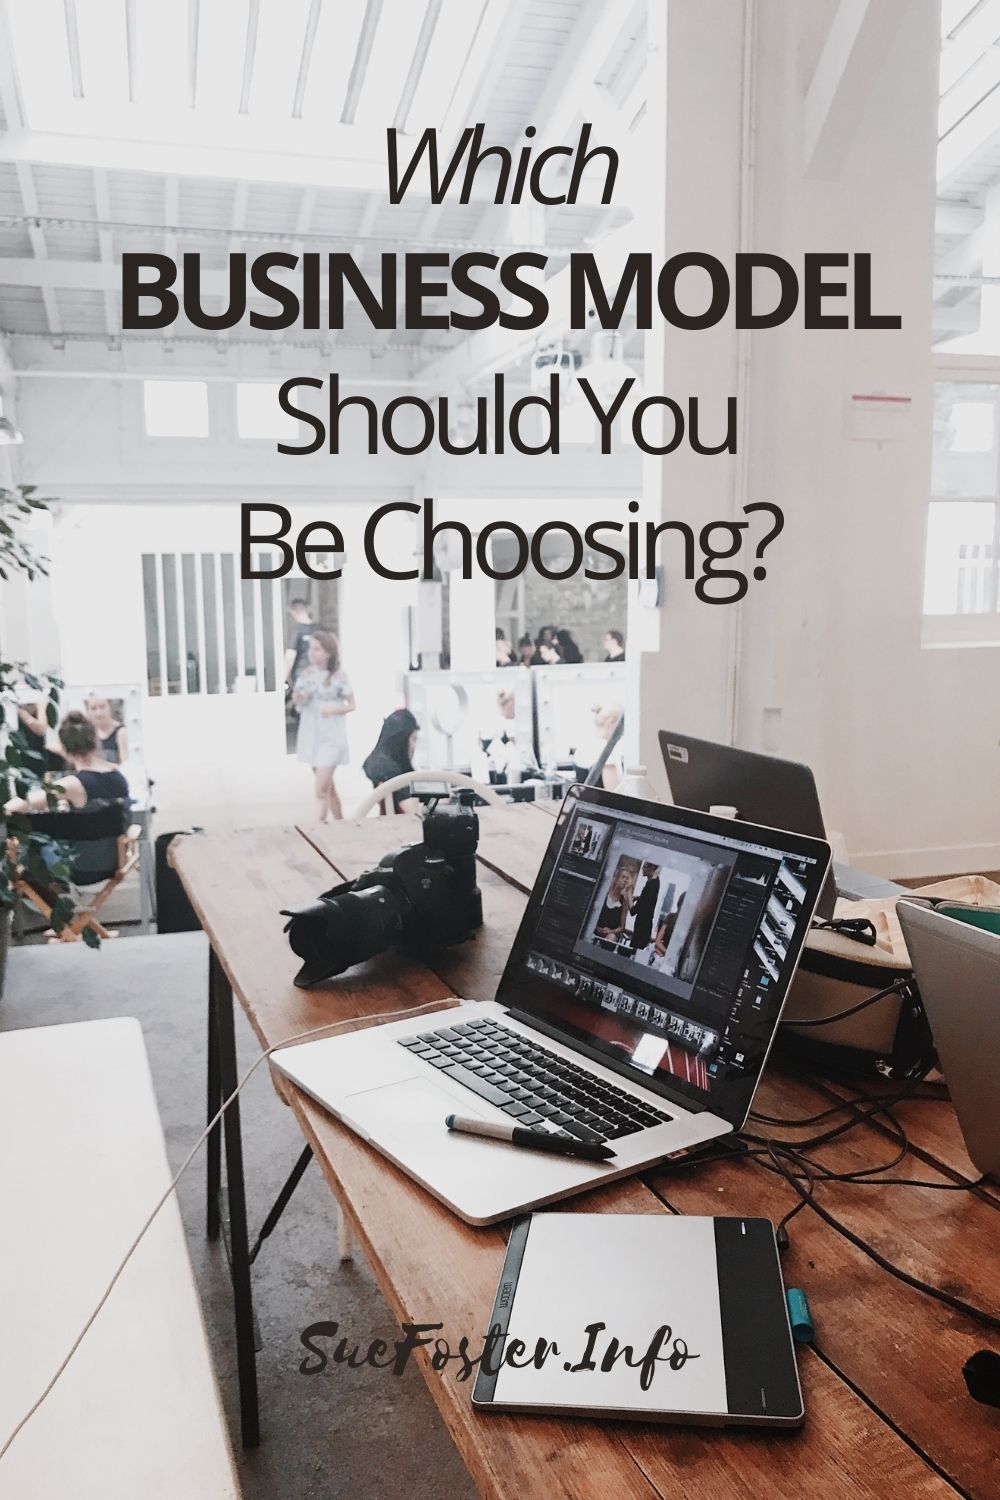 There are a few different business models to consider, and all of them offer something different to business owners and customers.